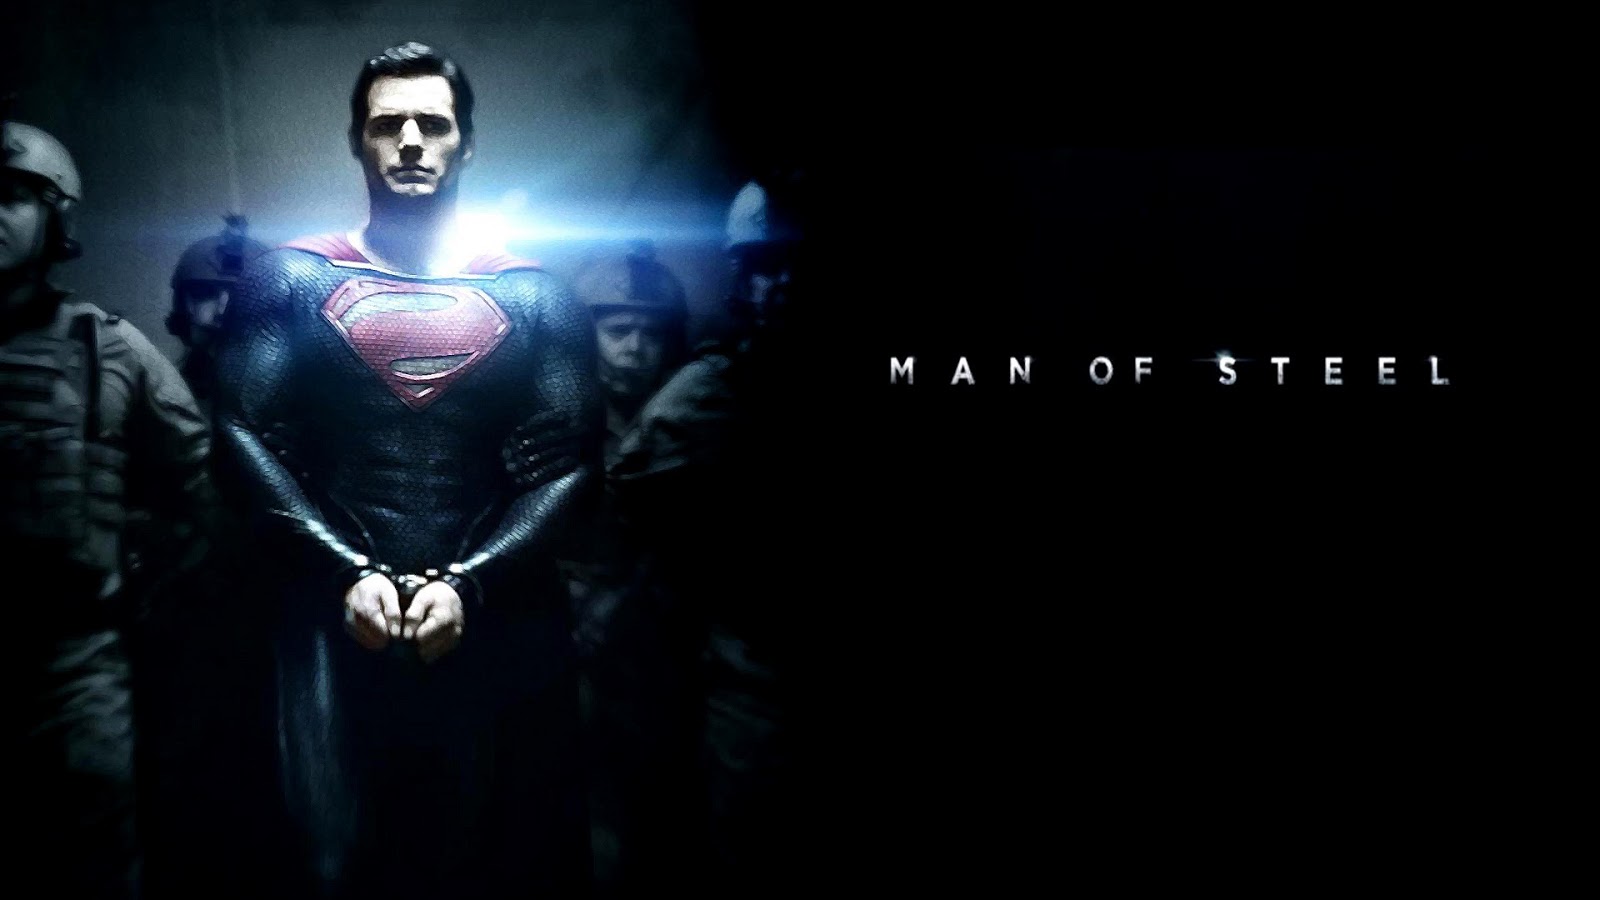 Man of Steel Wallpaper Wallpapers Factory to make